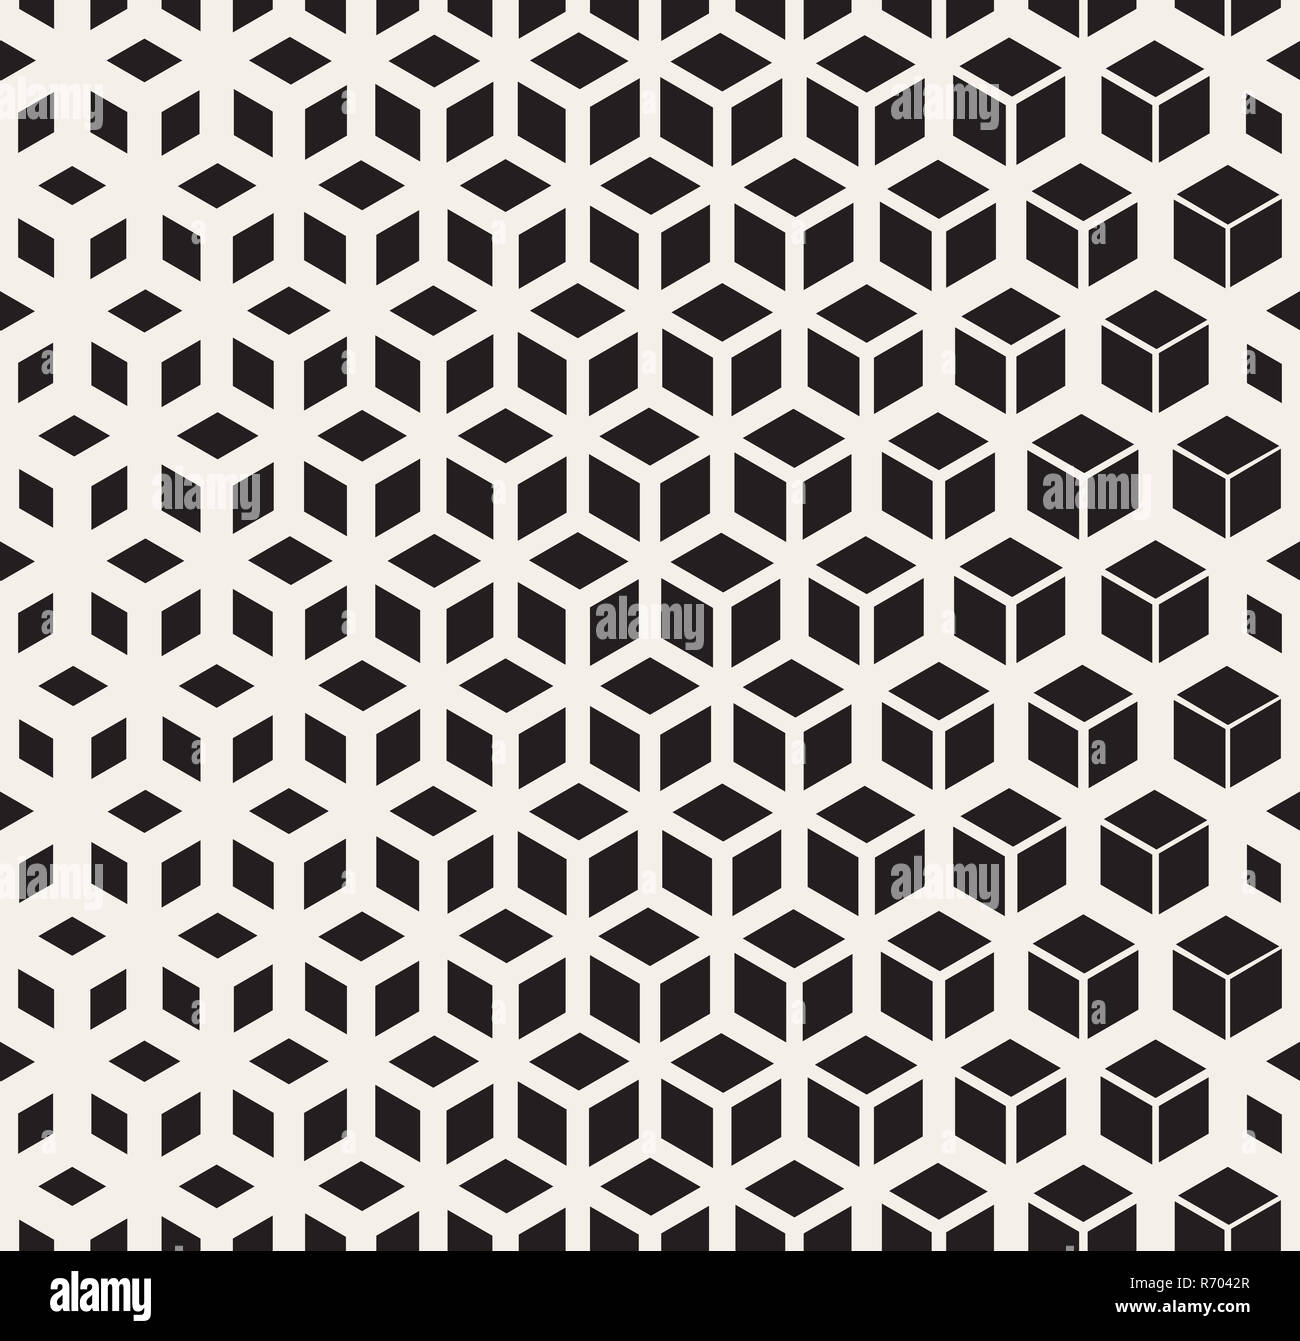 Vector Seamless Black And White Geometric Cube Shape Lines Halftone